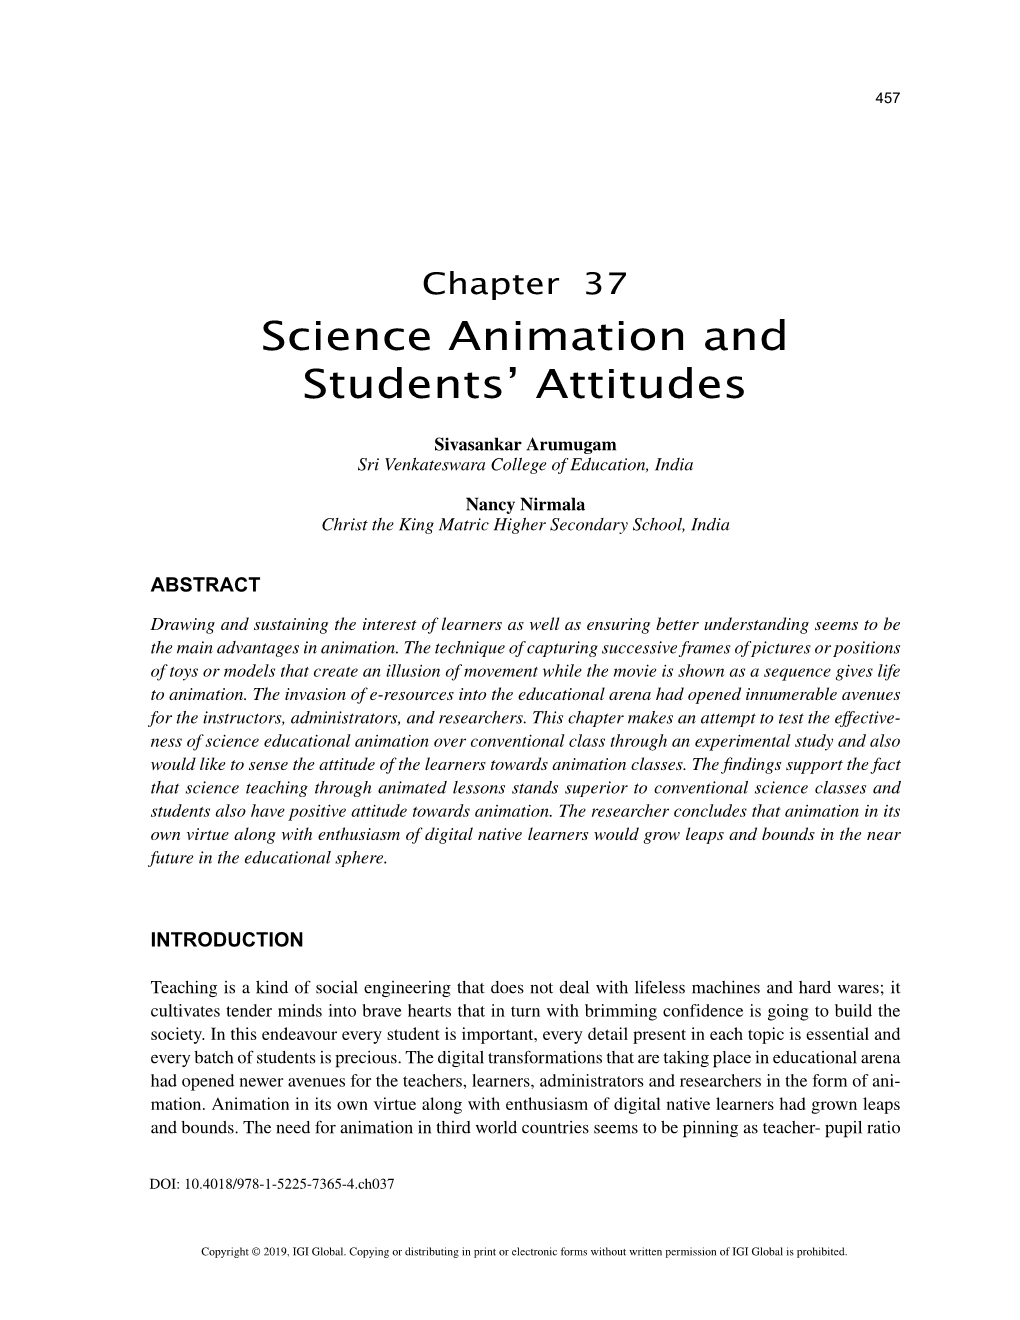 Science Animation and Students' Attitudes